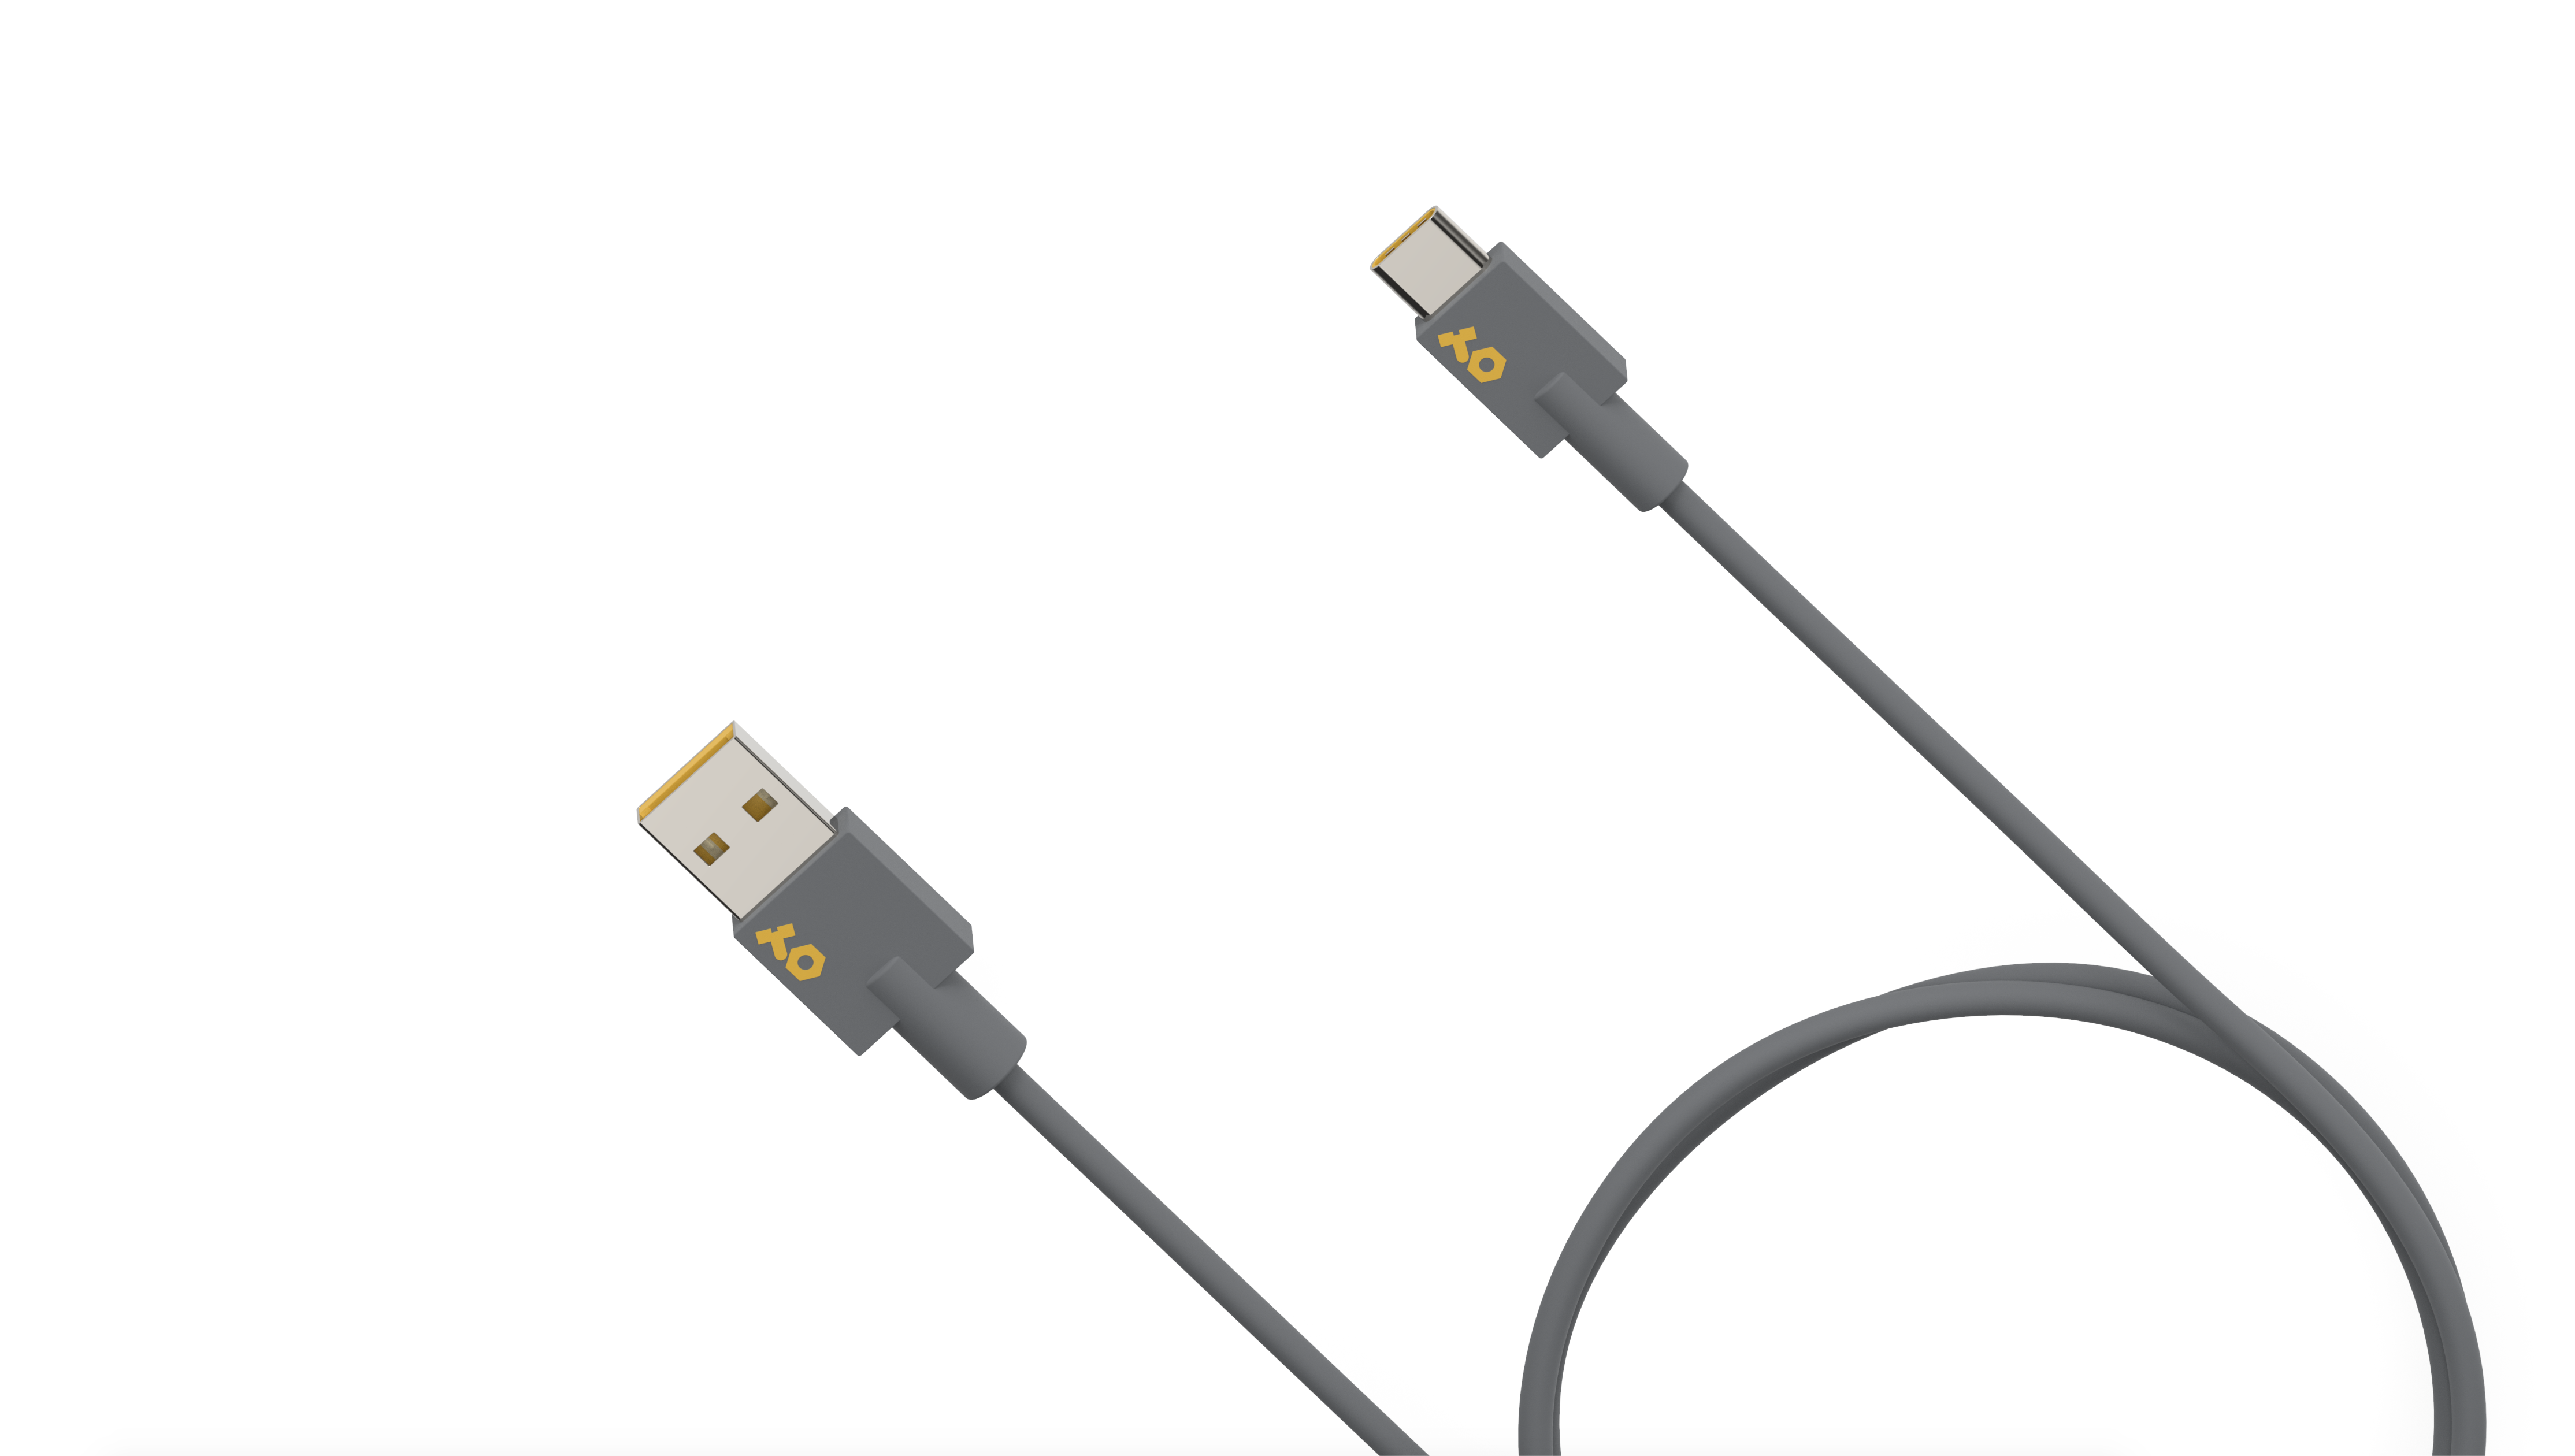 USB-A to USB-C Cable Design and renderfor teenage engineering 2017